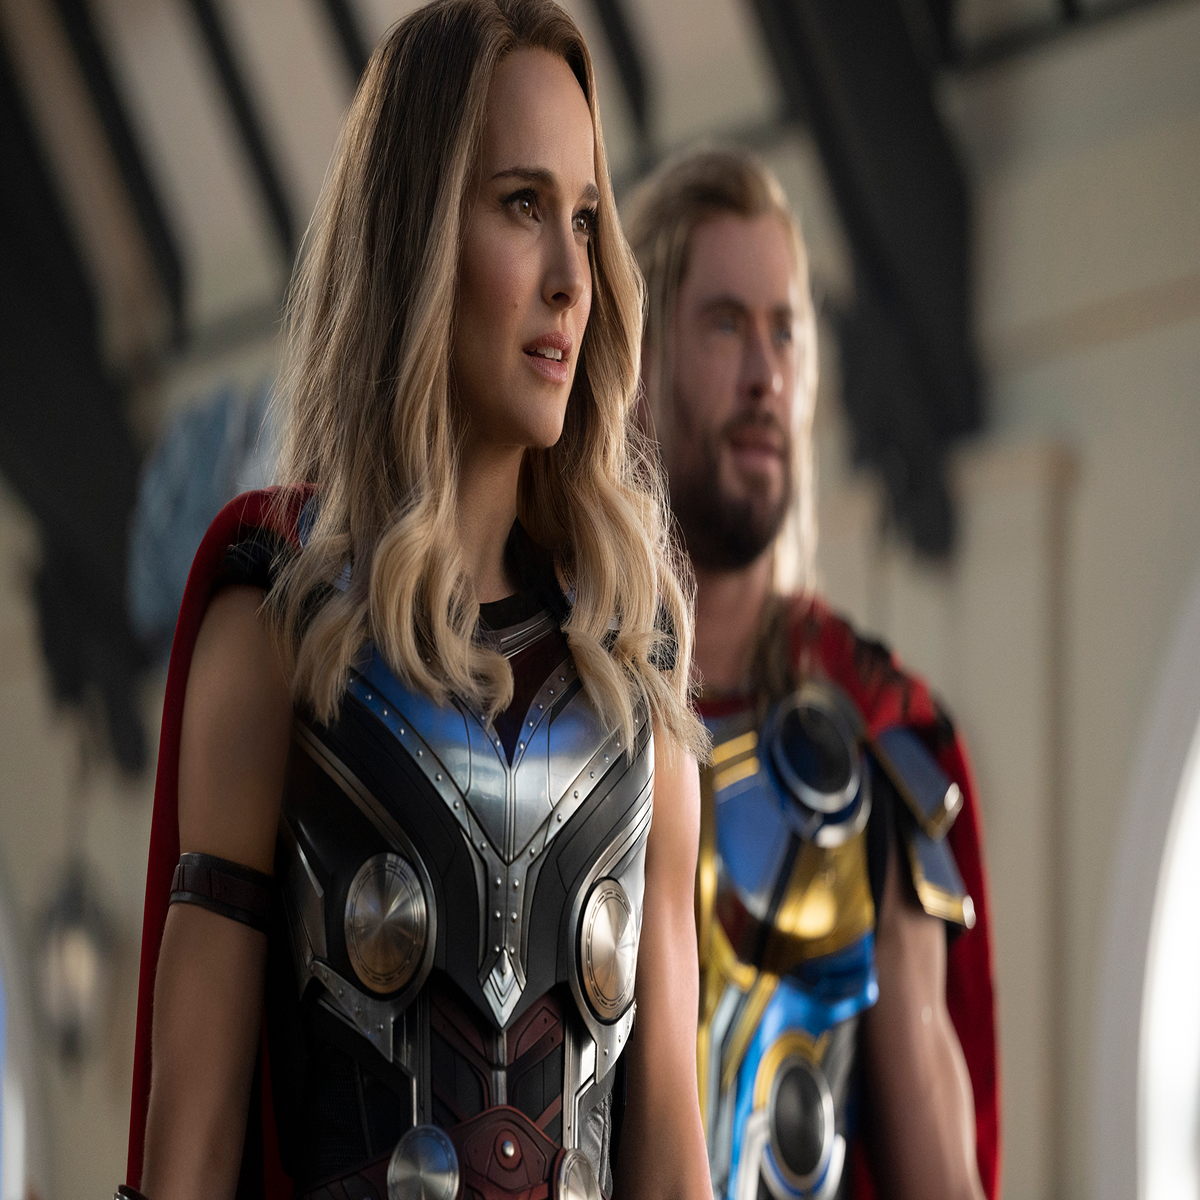 Thor: Love And Thunder trailer sees Chris Hemsworth facing off